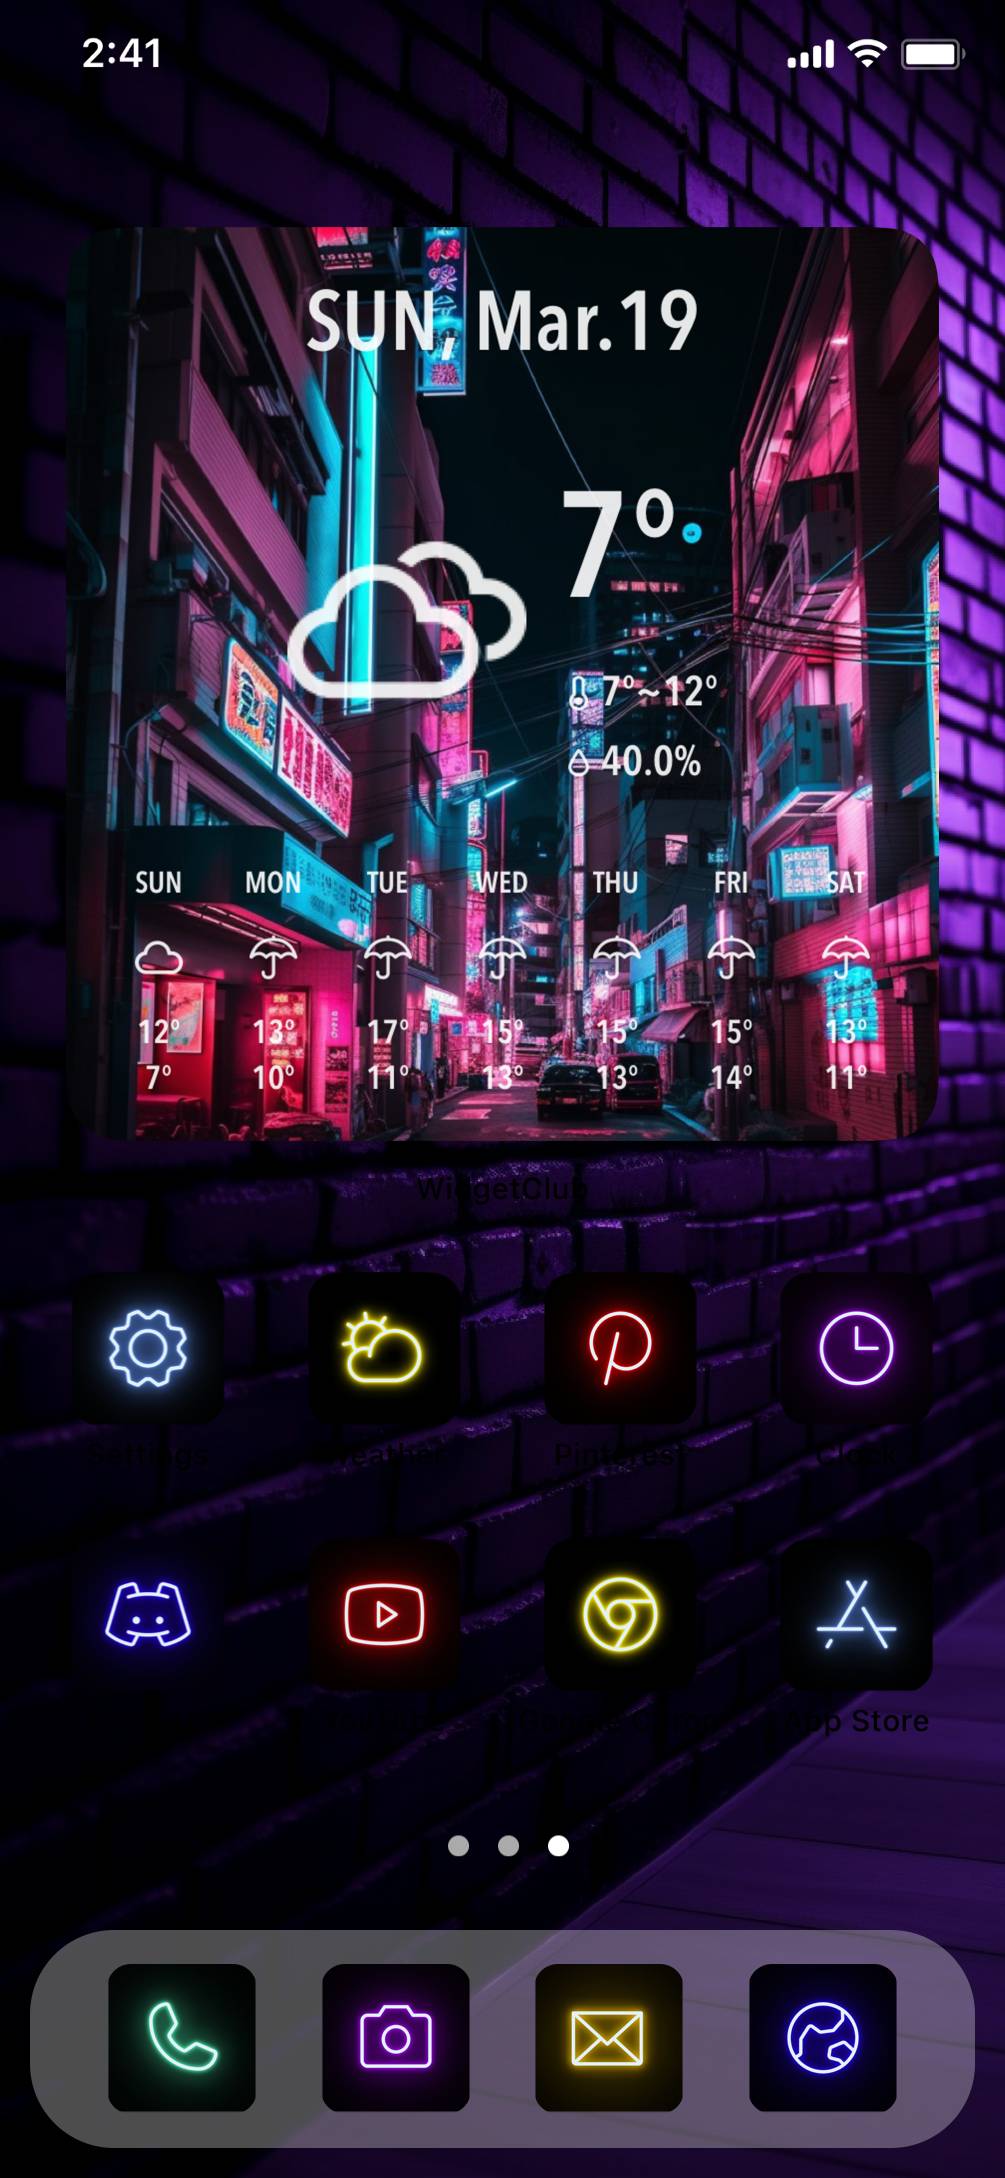 Neon cool home screen theme ホーム画面カスタマイズ[66HZd9zvvw6sQxepySY9]